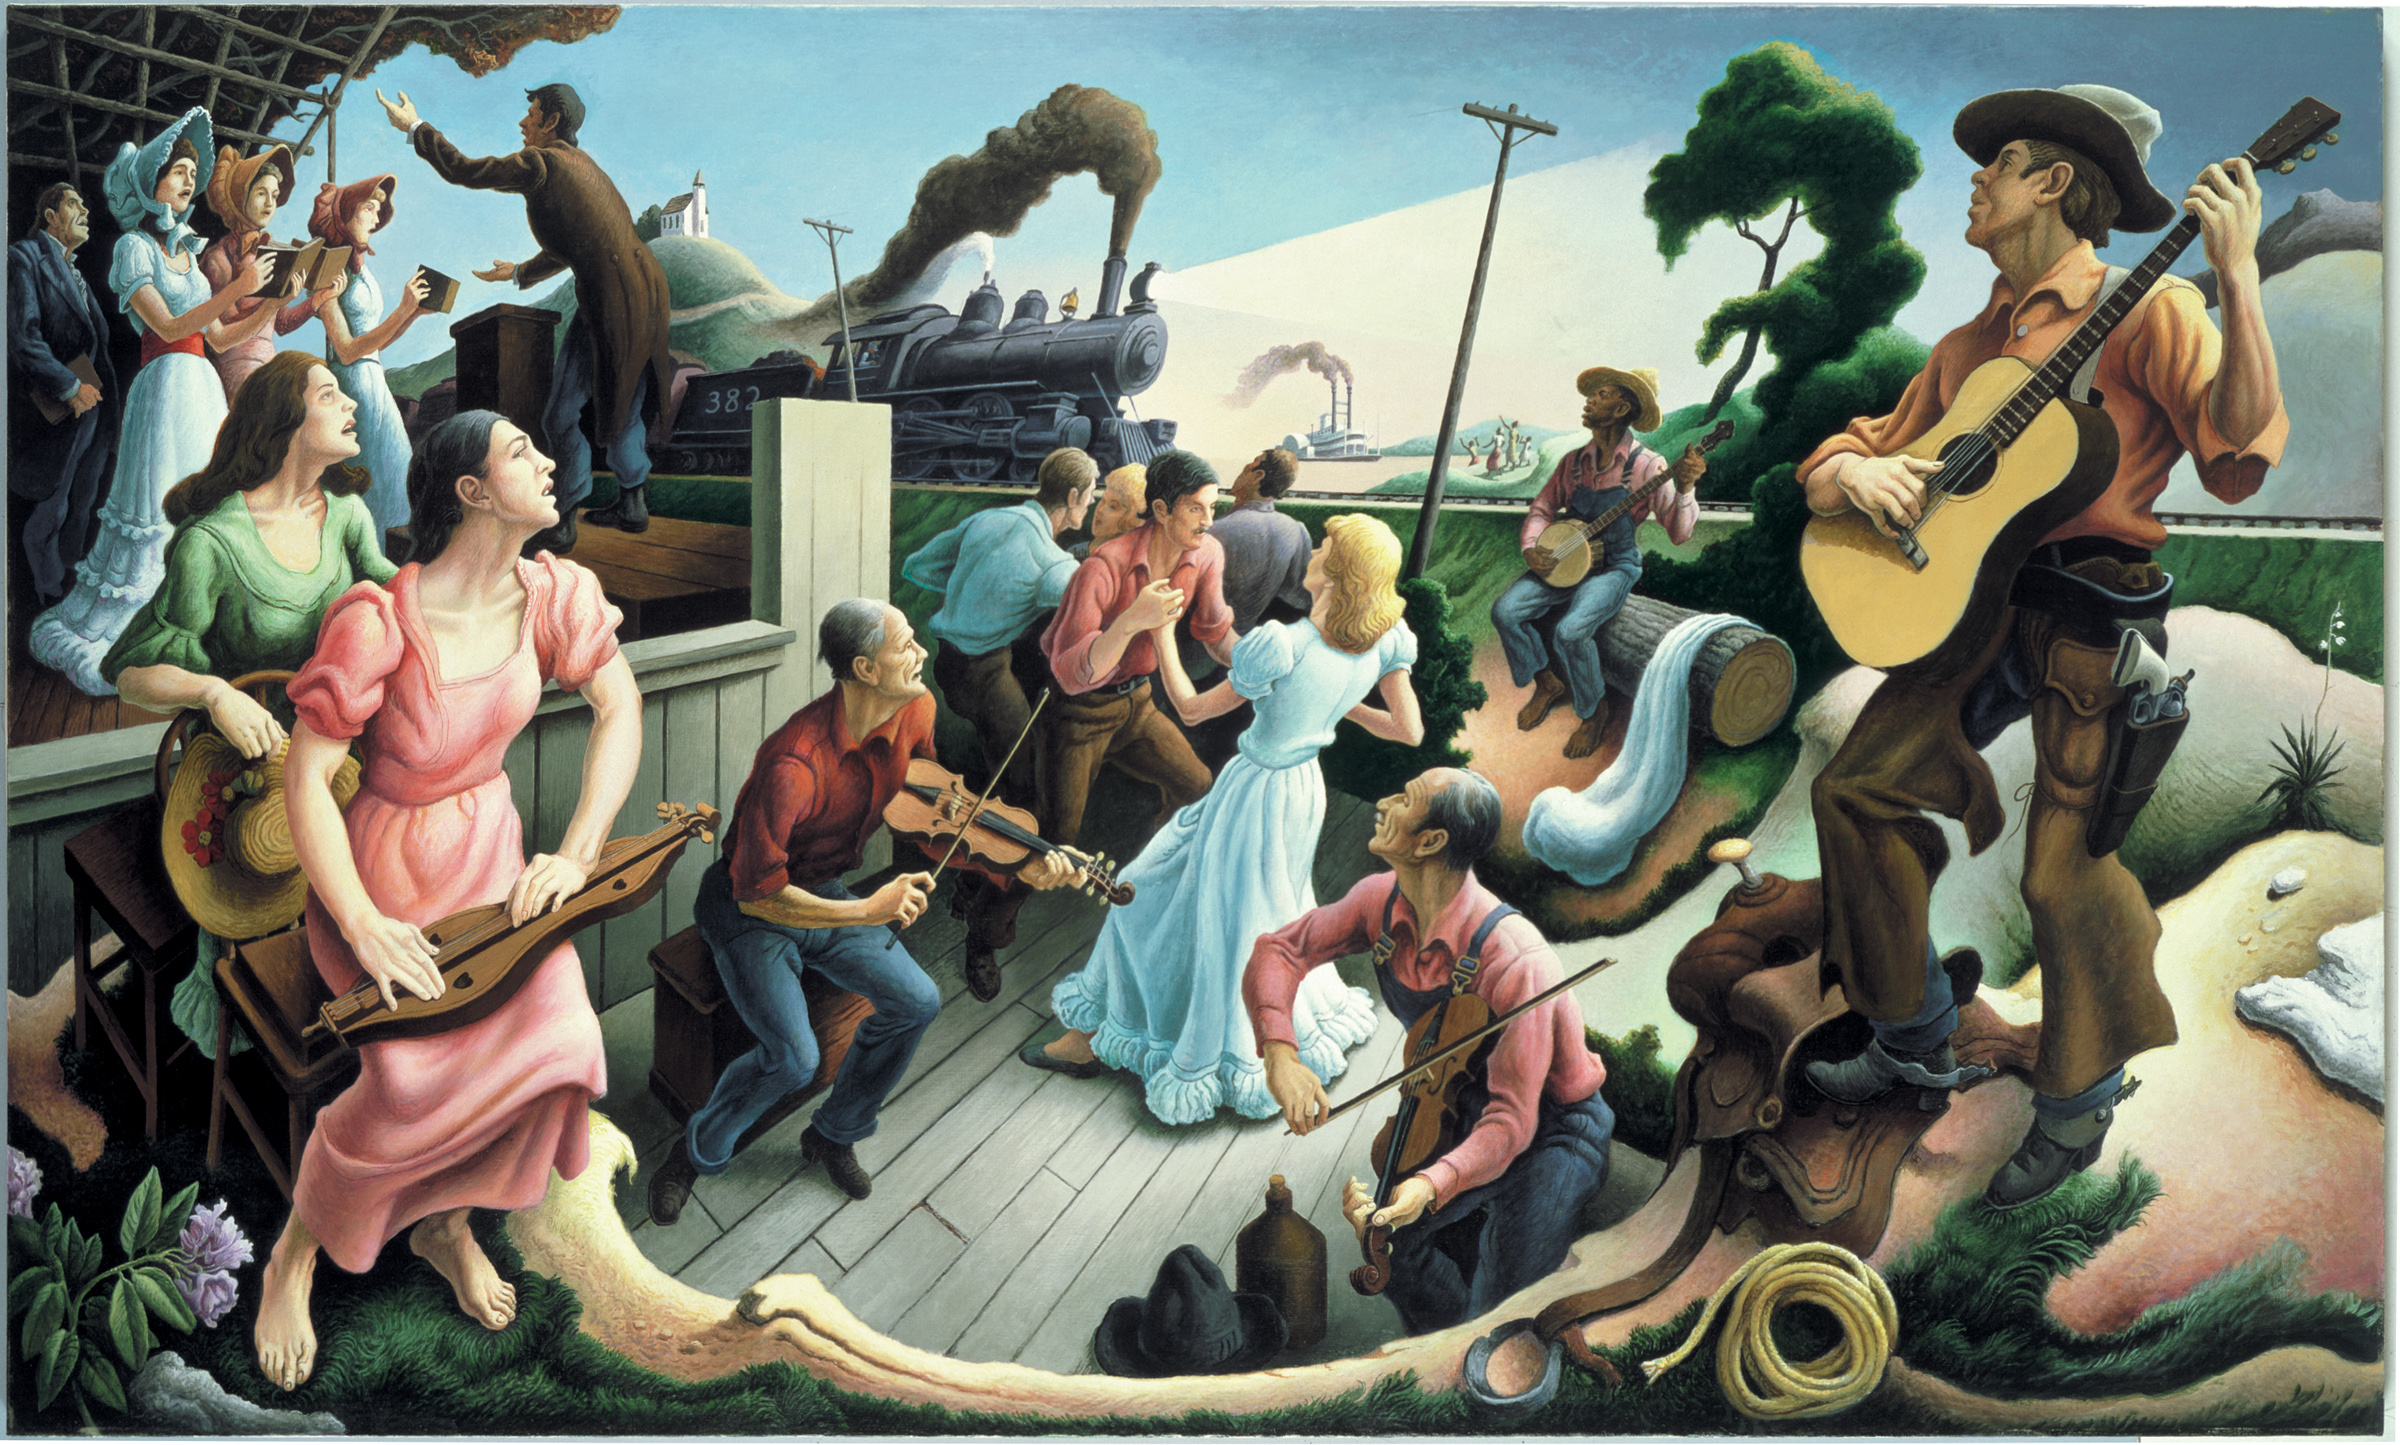 The Sources of Country Music by Thomas Hart Benton - 1975 - 82.9 x 304.8 cm Country Music Hall of Fame and Museum